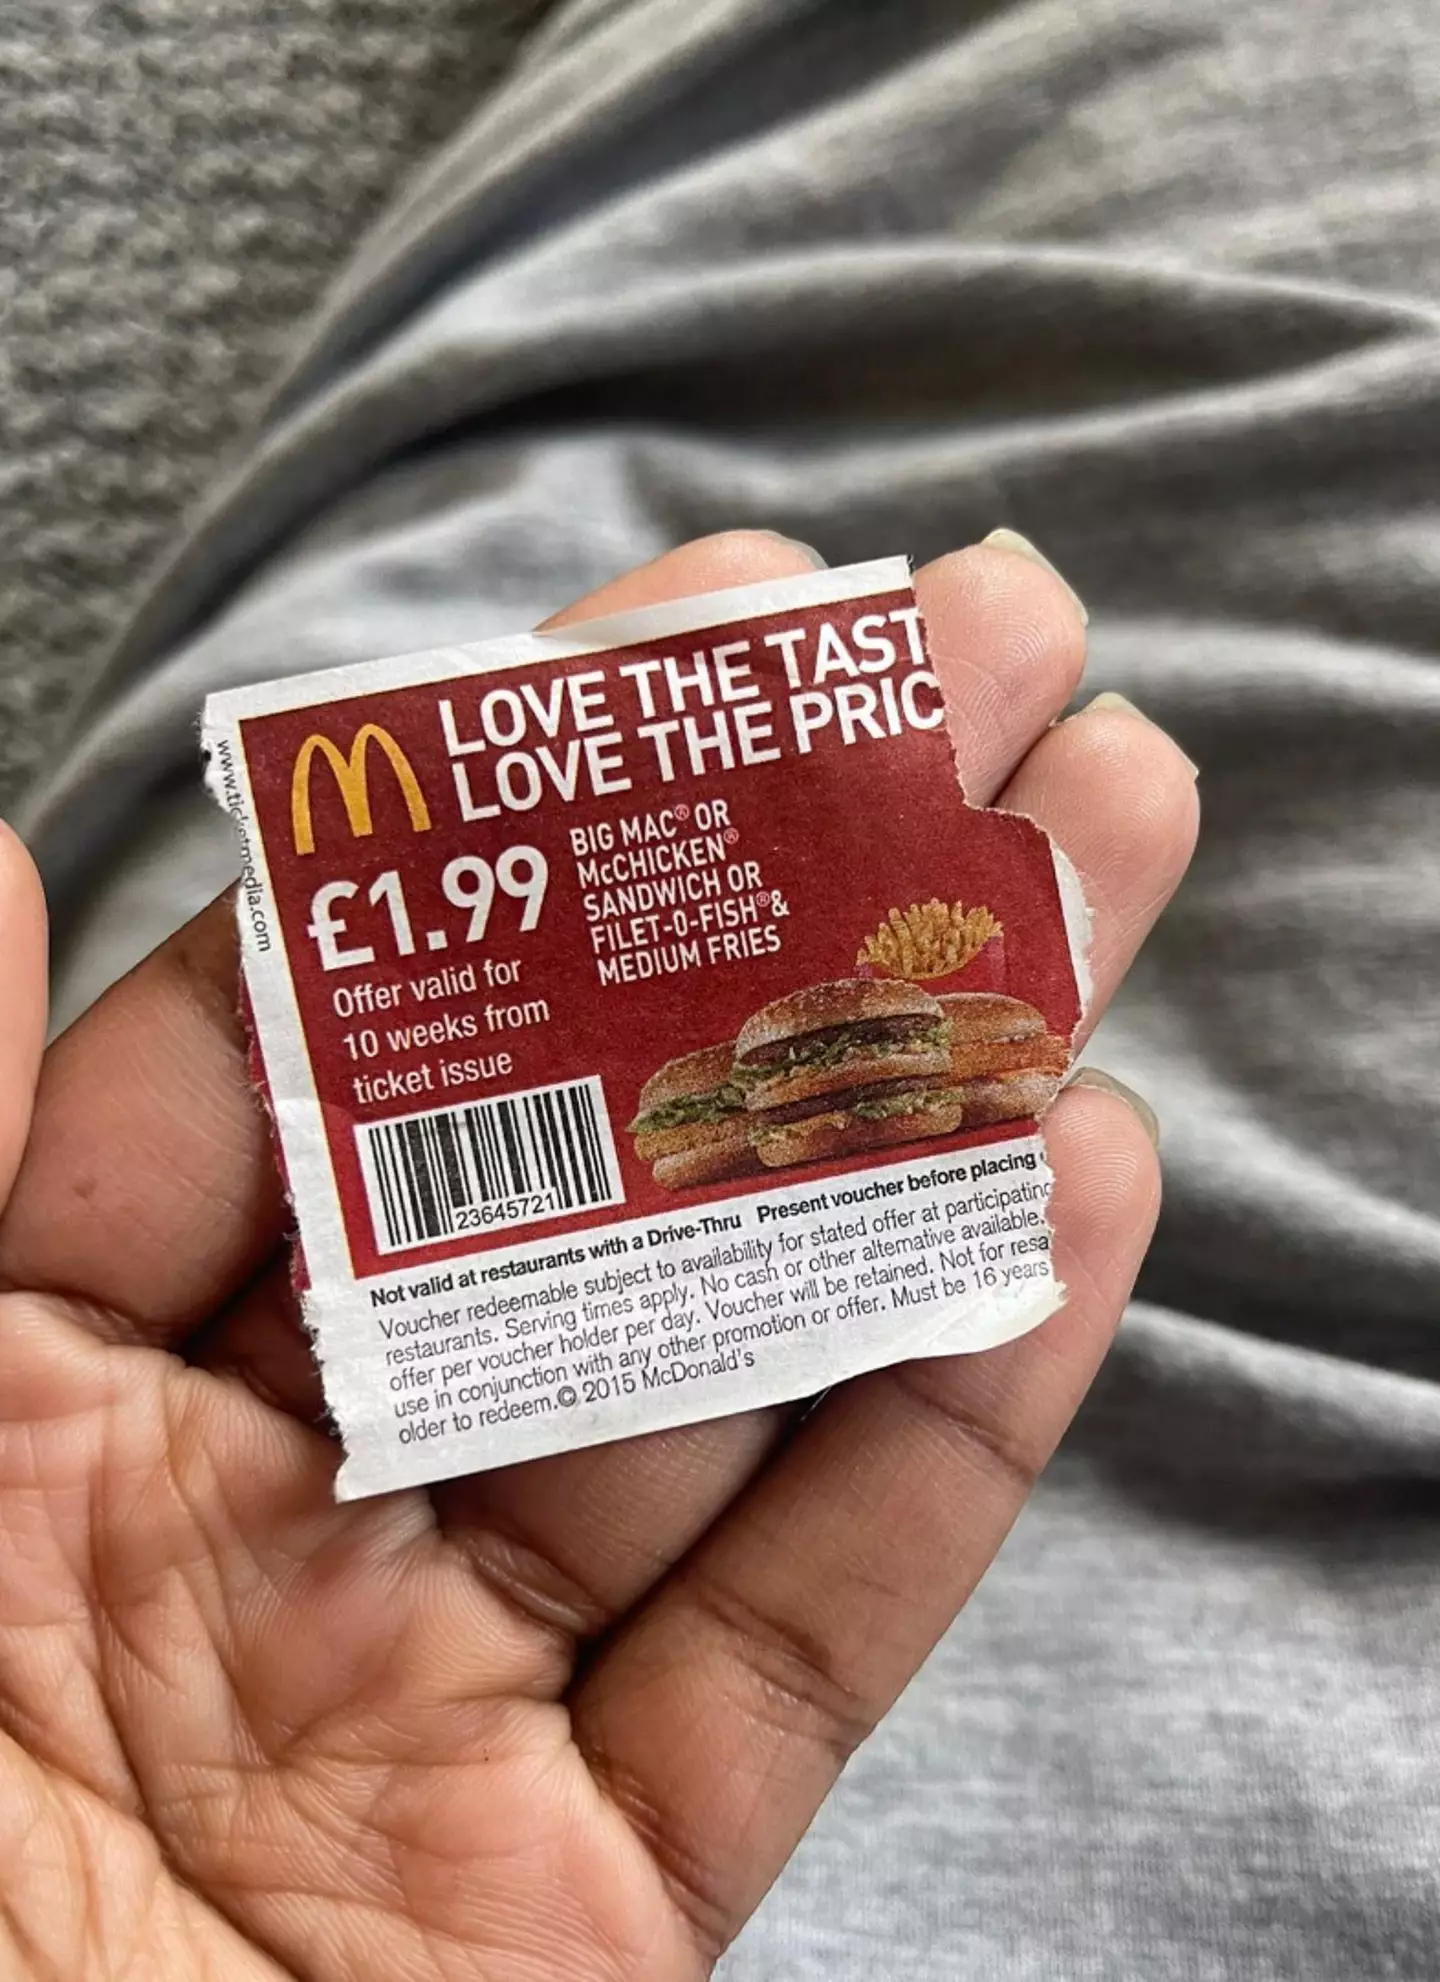 The nostalgia is real with this McDonald's coupon from 2015.